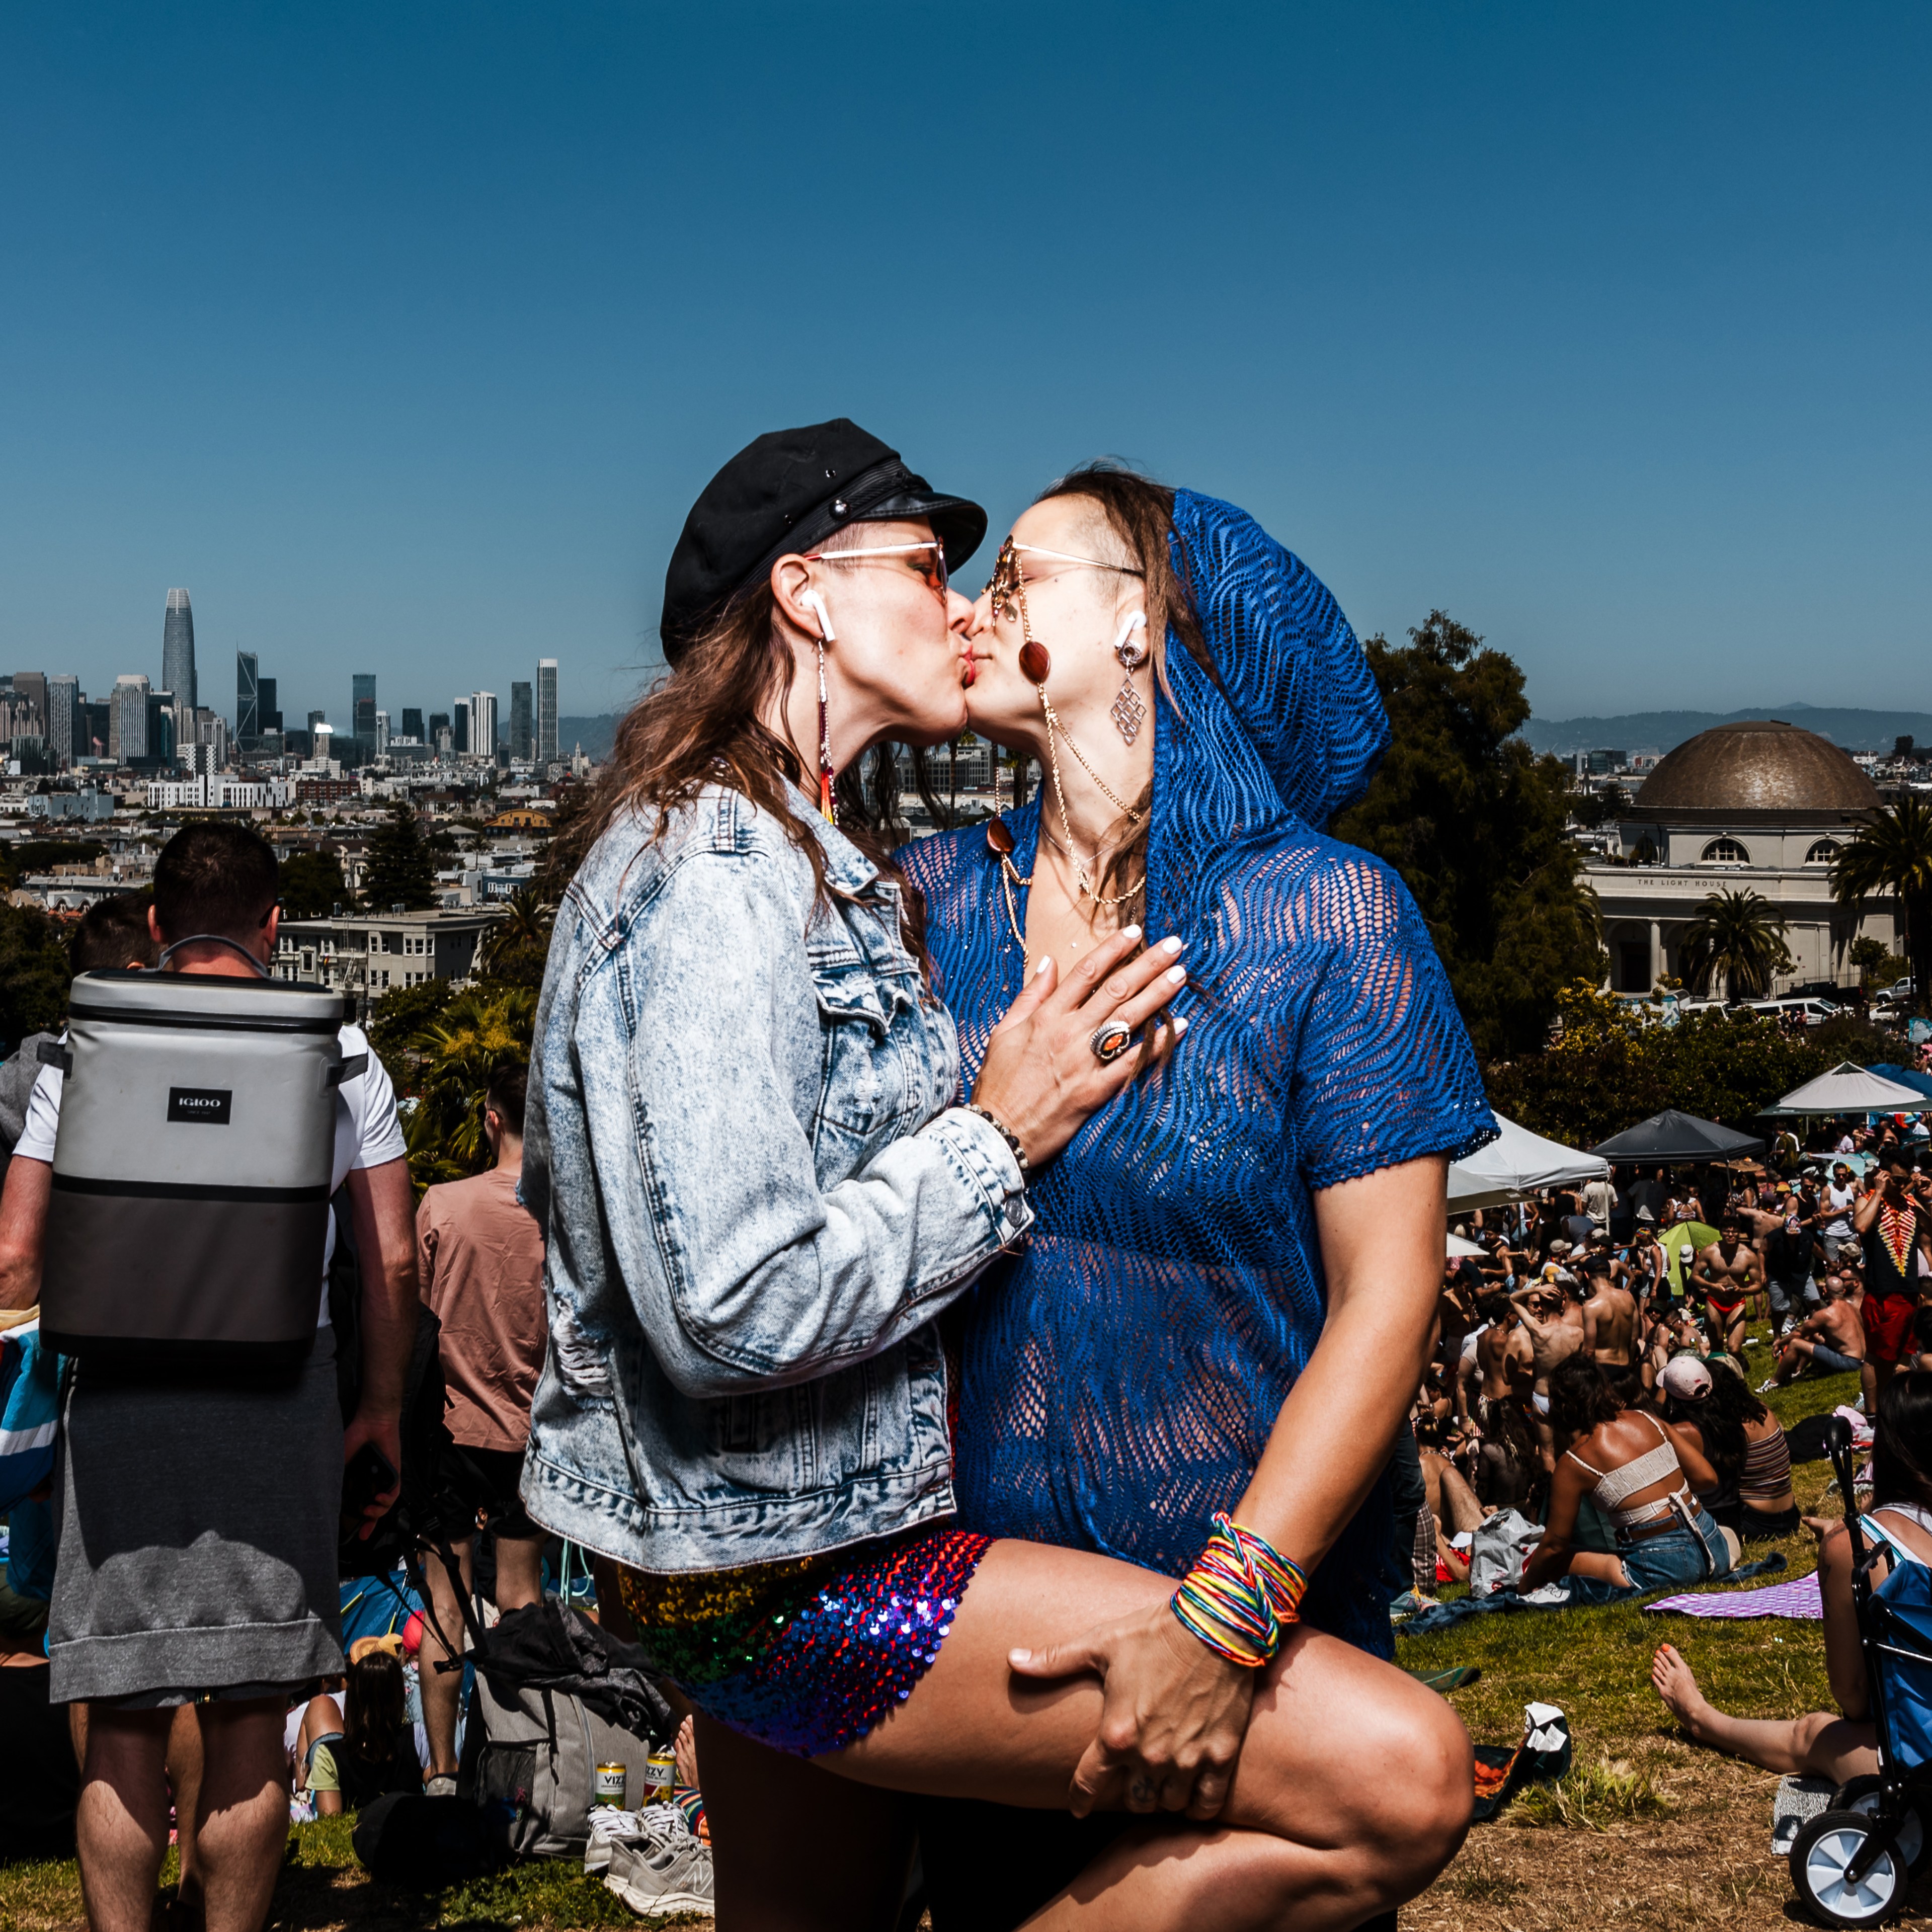 Two people share a kiss at an outdoor event with a crowd behind them and a city skyline in the background. One wears a denim jacket, and the other a blue mesh top.